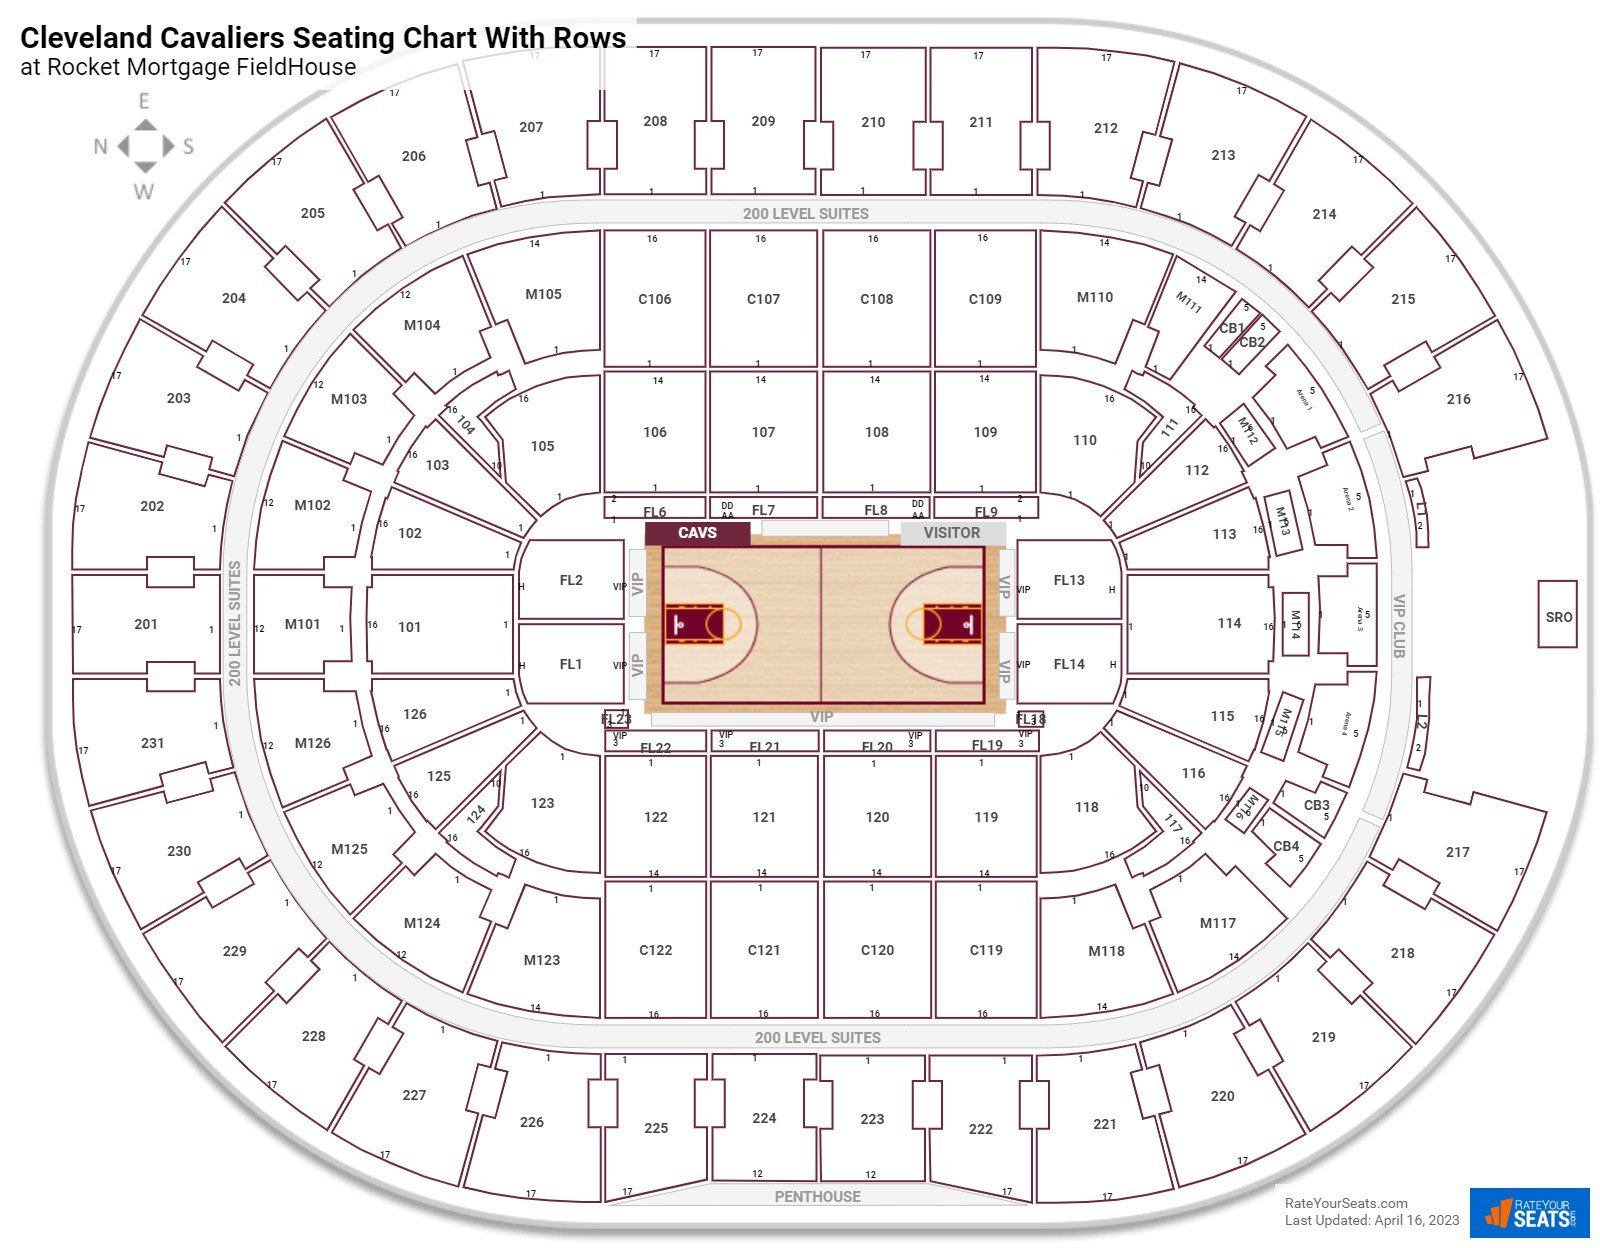 Rocket Mortgage FieldHouse seating chart with row numbers